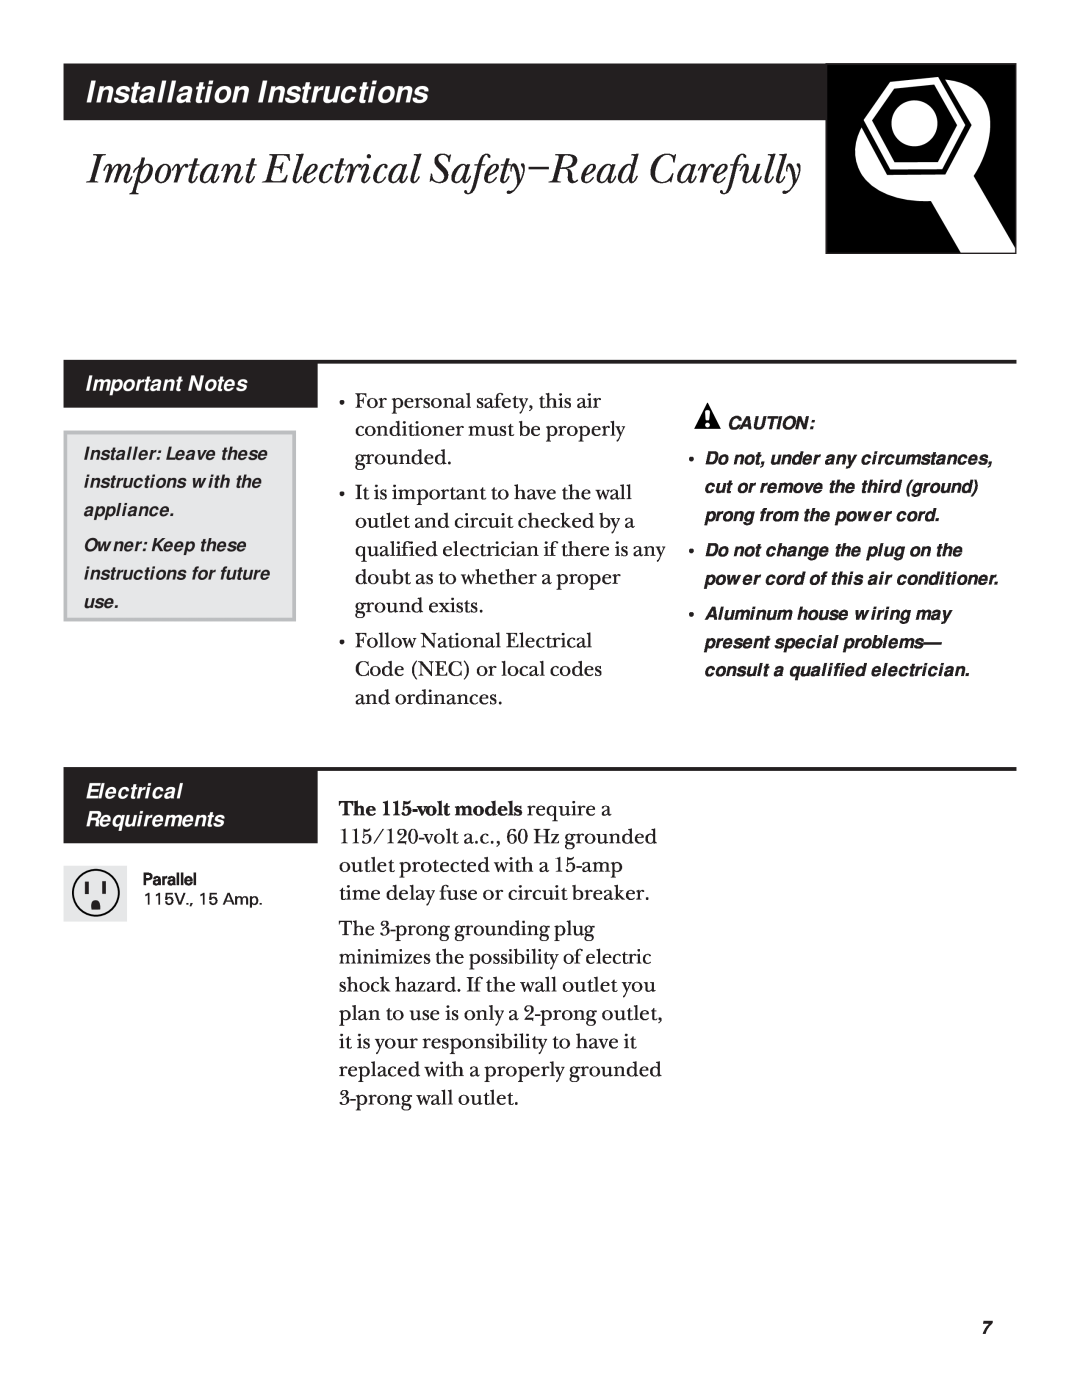 GE ABP10 Important Electrical Safety-ReadCarefully, Installation Instructions, Important Notes, Electrical Requirements 